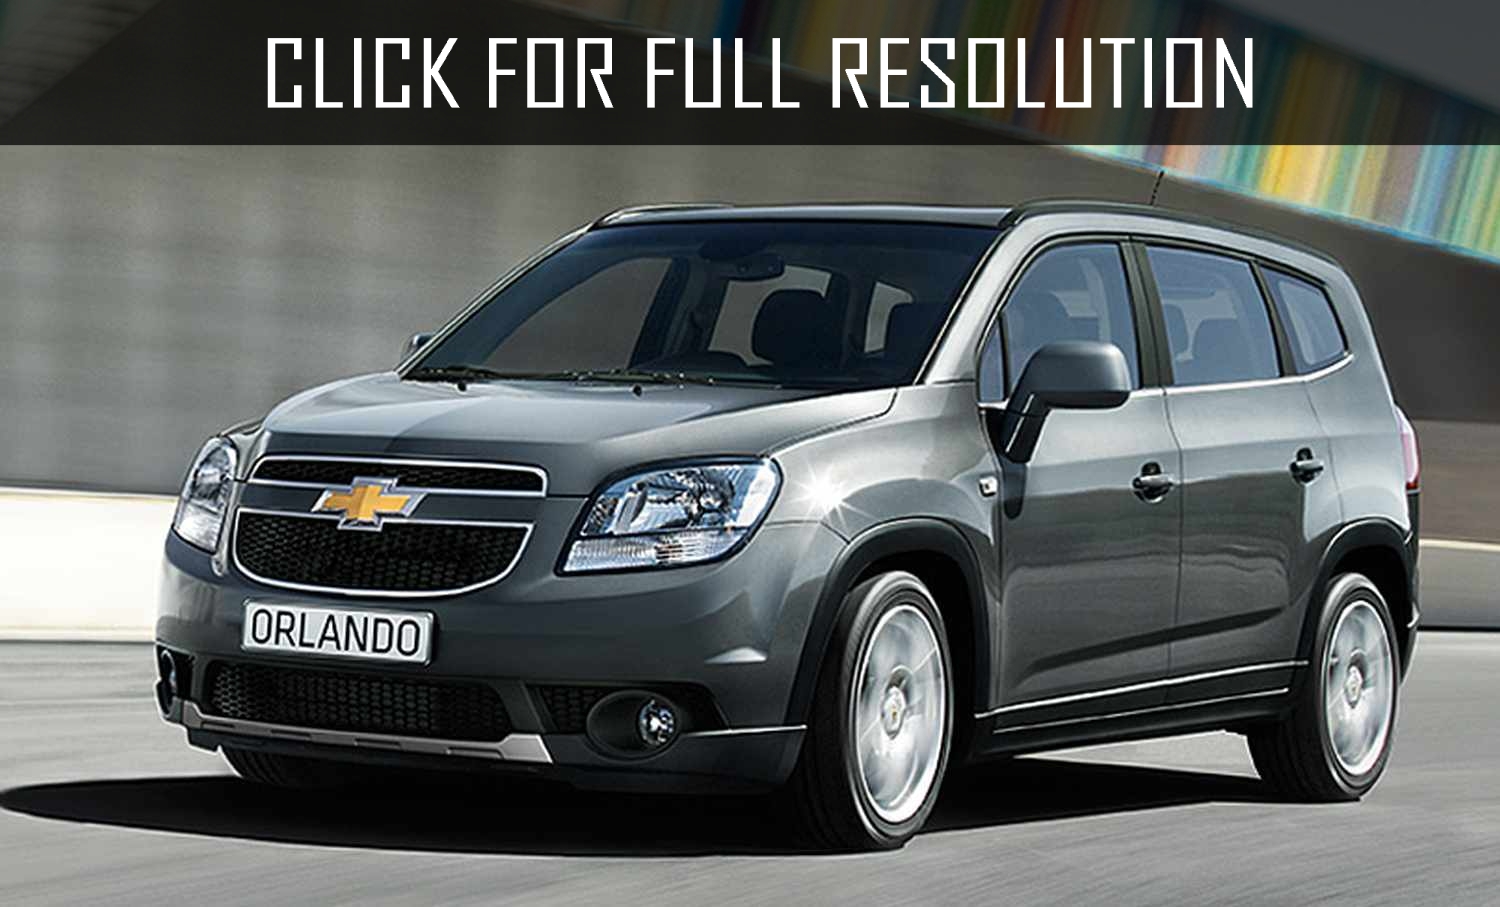 Chevrolet Orlando 1.8 Ls reviews, prices, ratings with